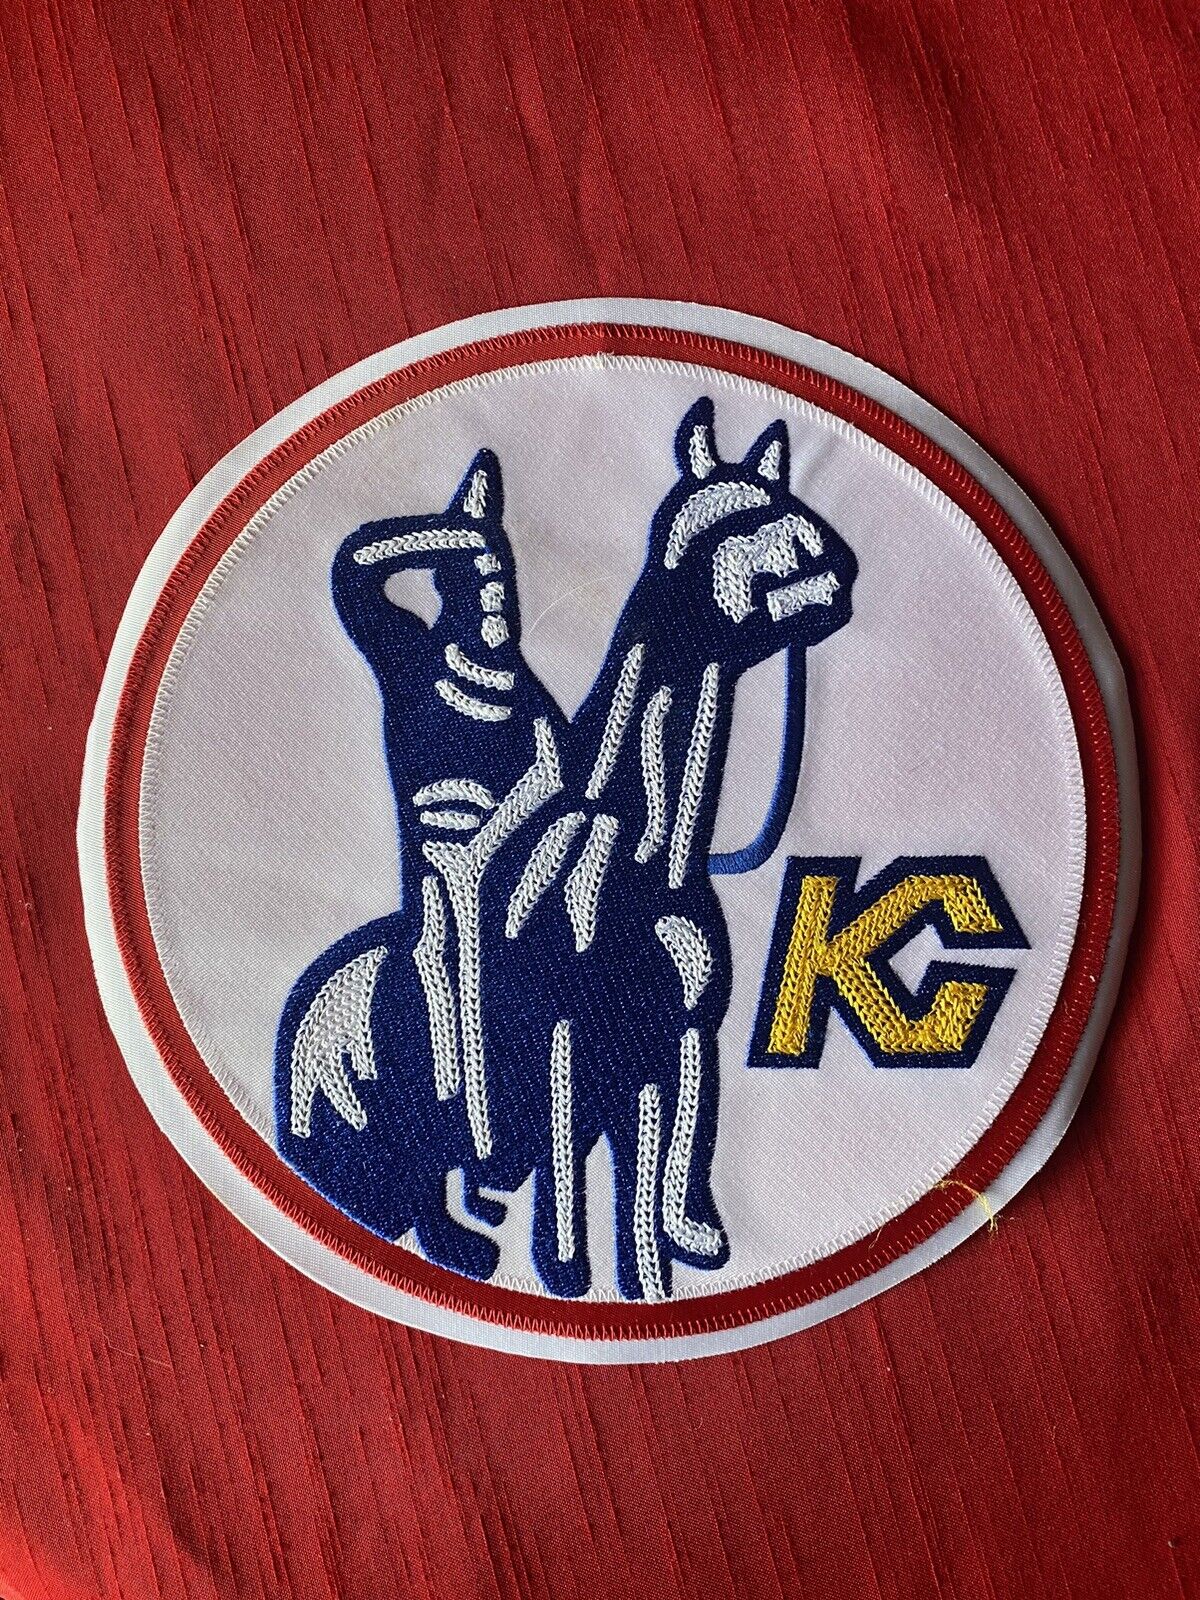 Kansas City ,The Scout, Collectible Patch